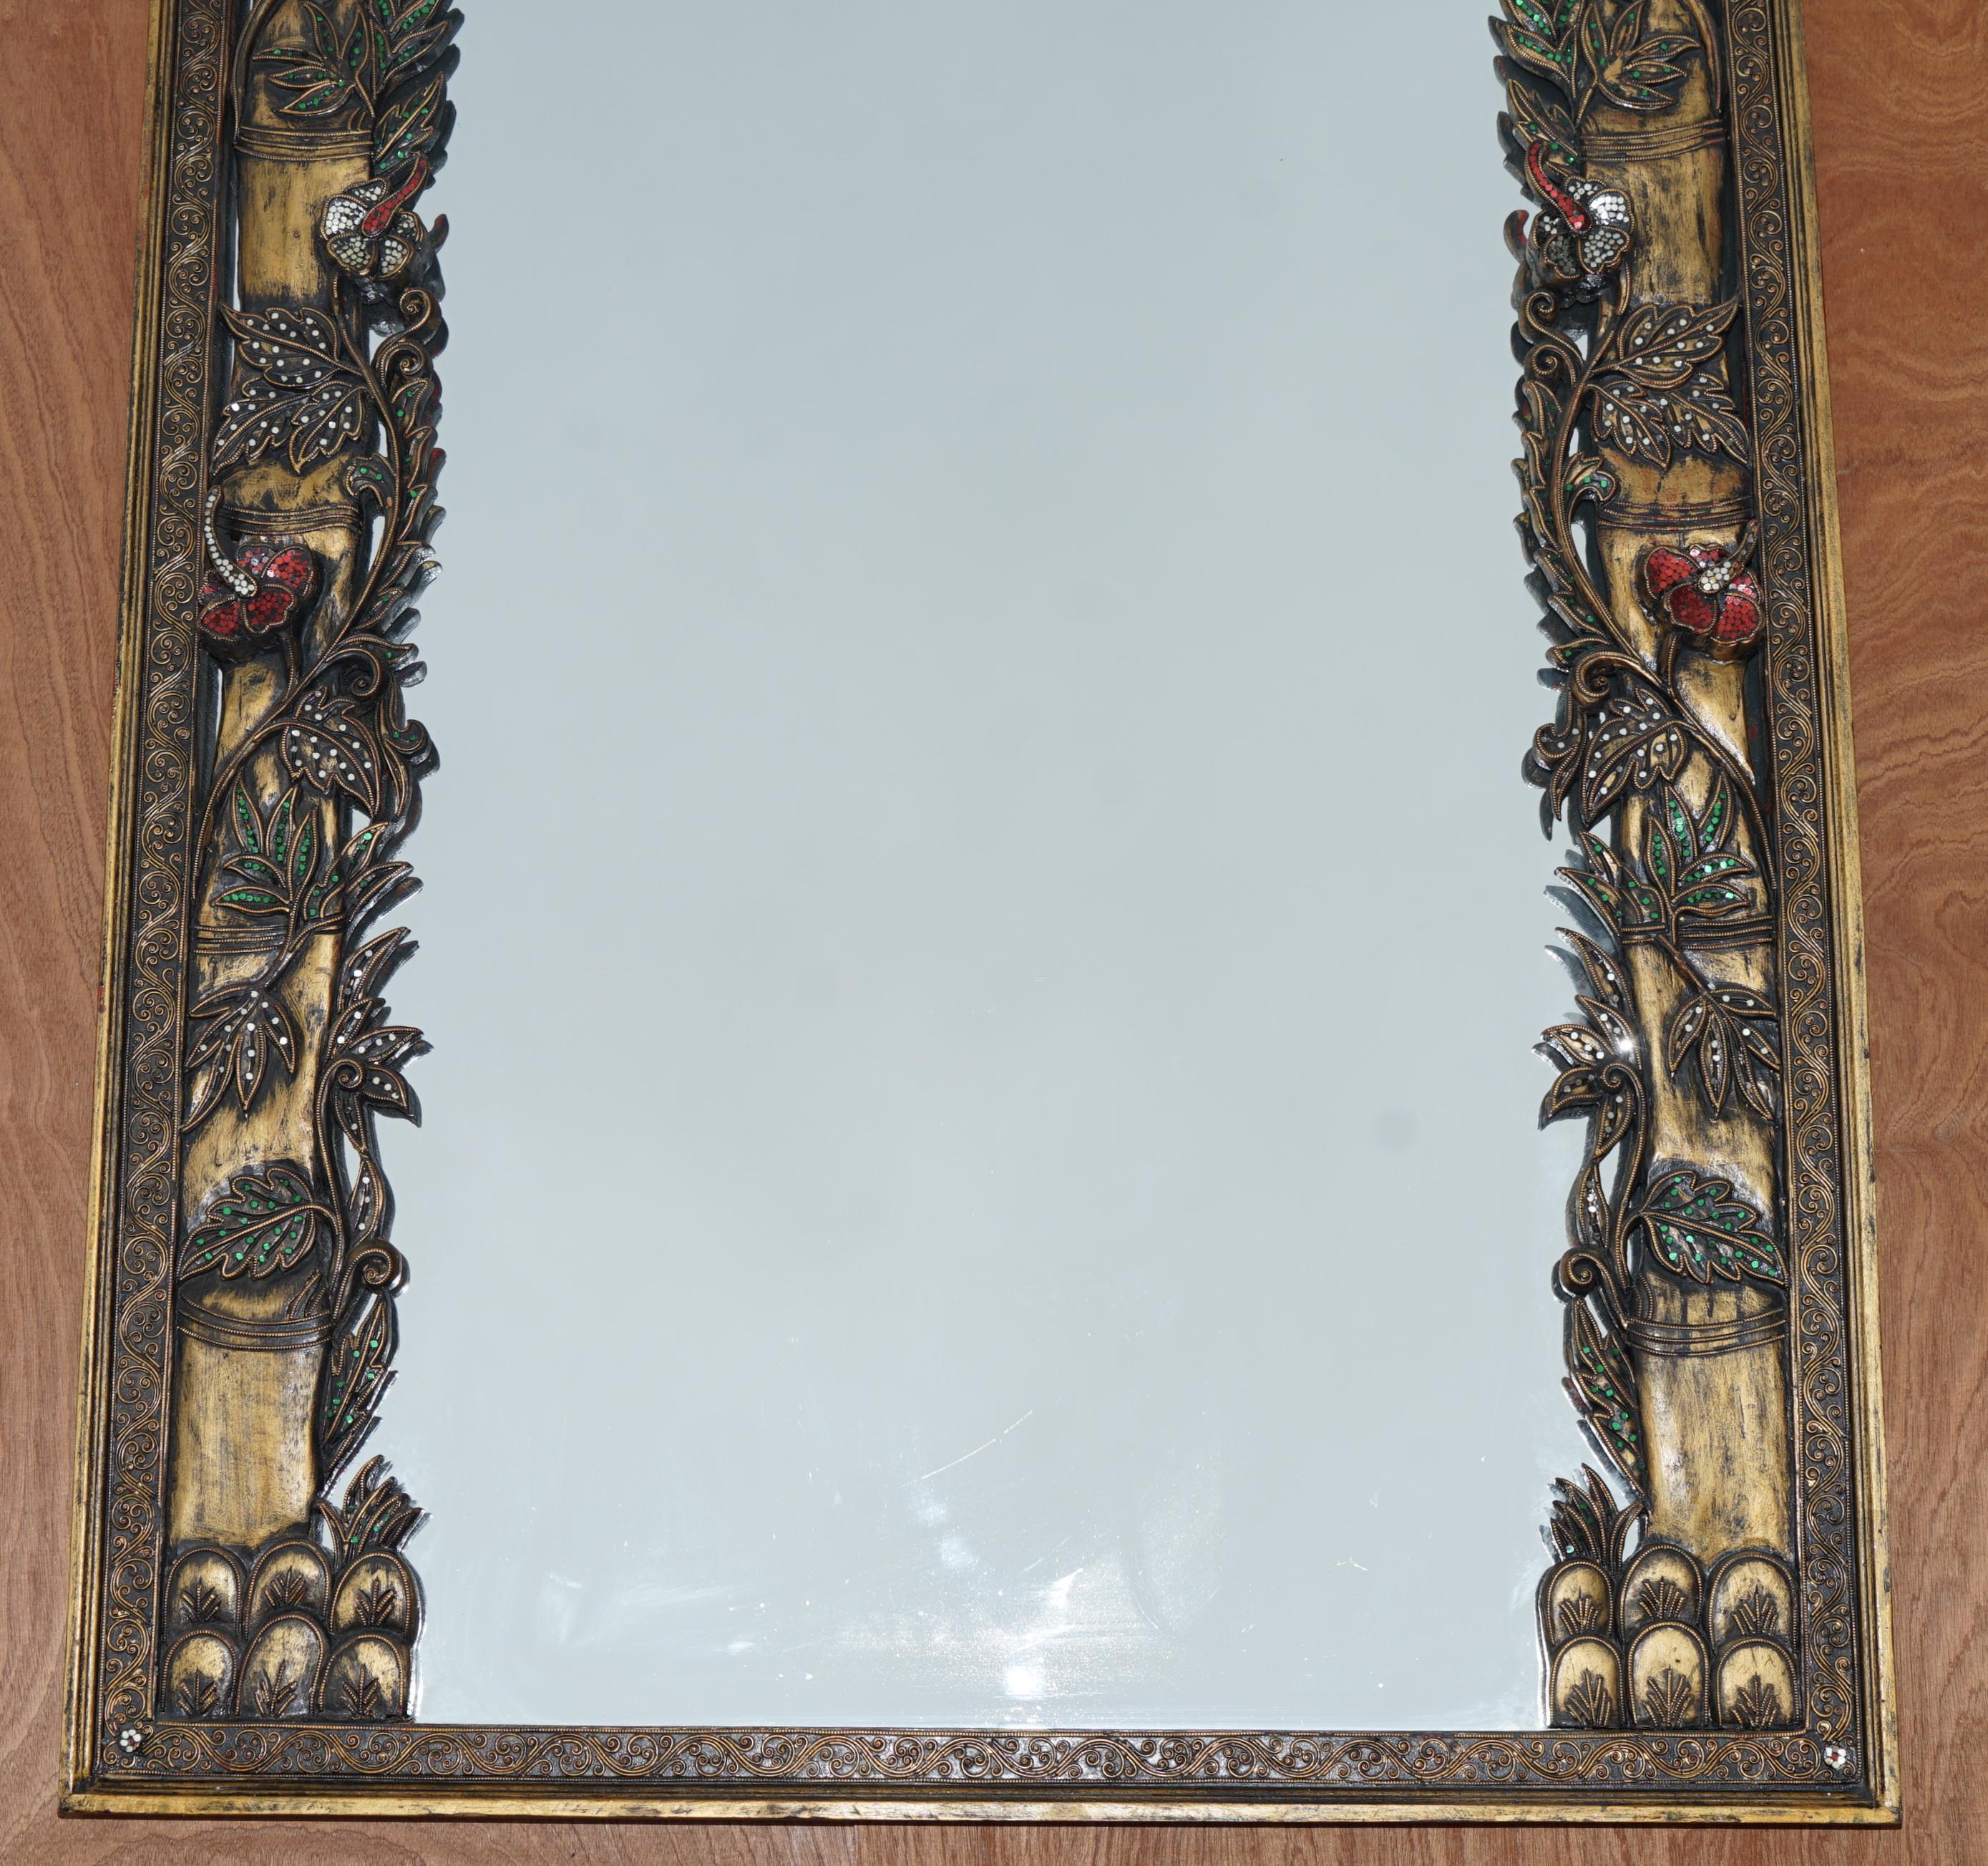 We are delighted to offer this very decorative full length mirror with birds of paradise in trees details

A super decorators piece, the frame has a depth you just don’t see often, its heavily carved and very intricate with a wonderful forest